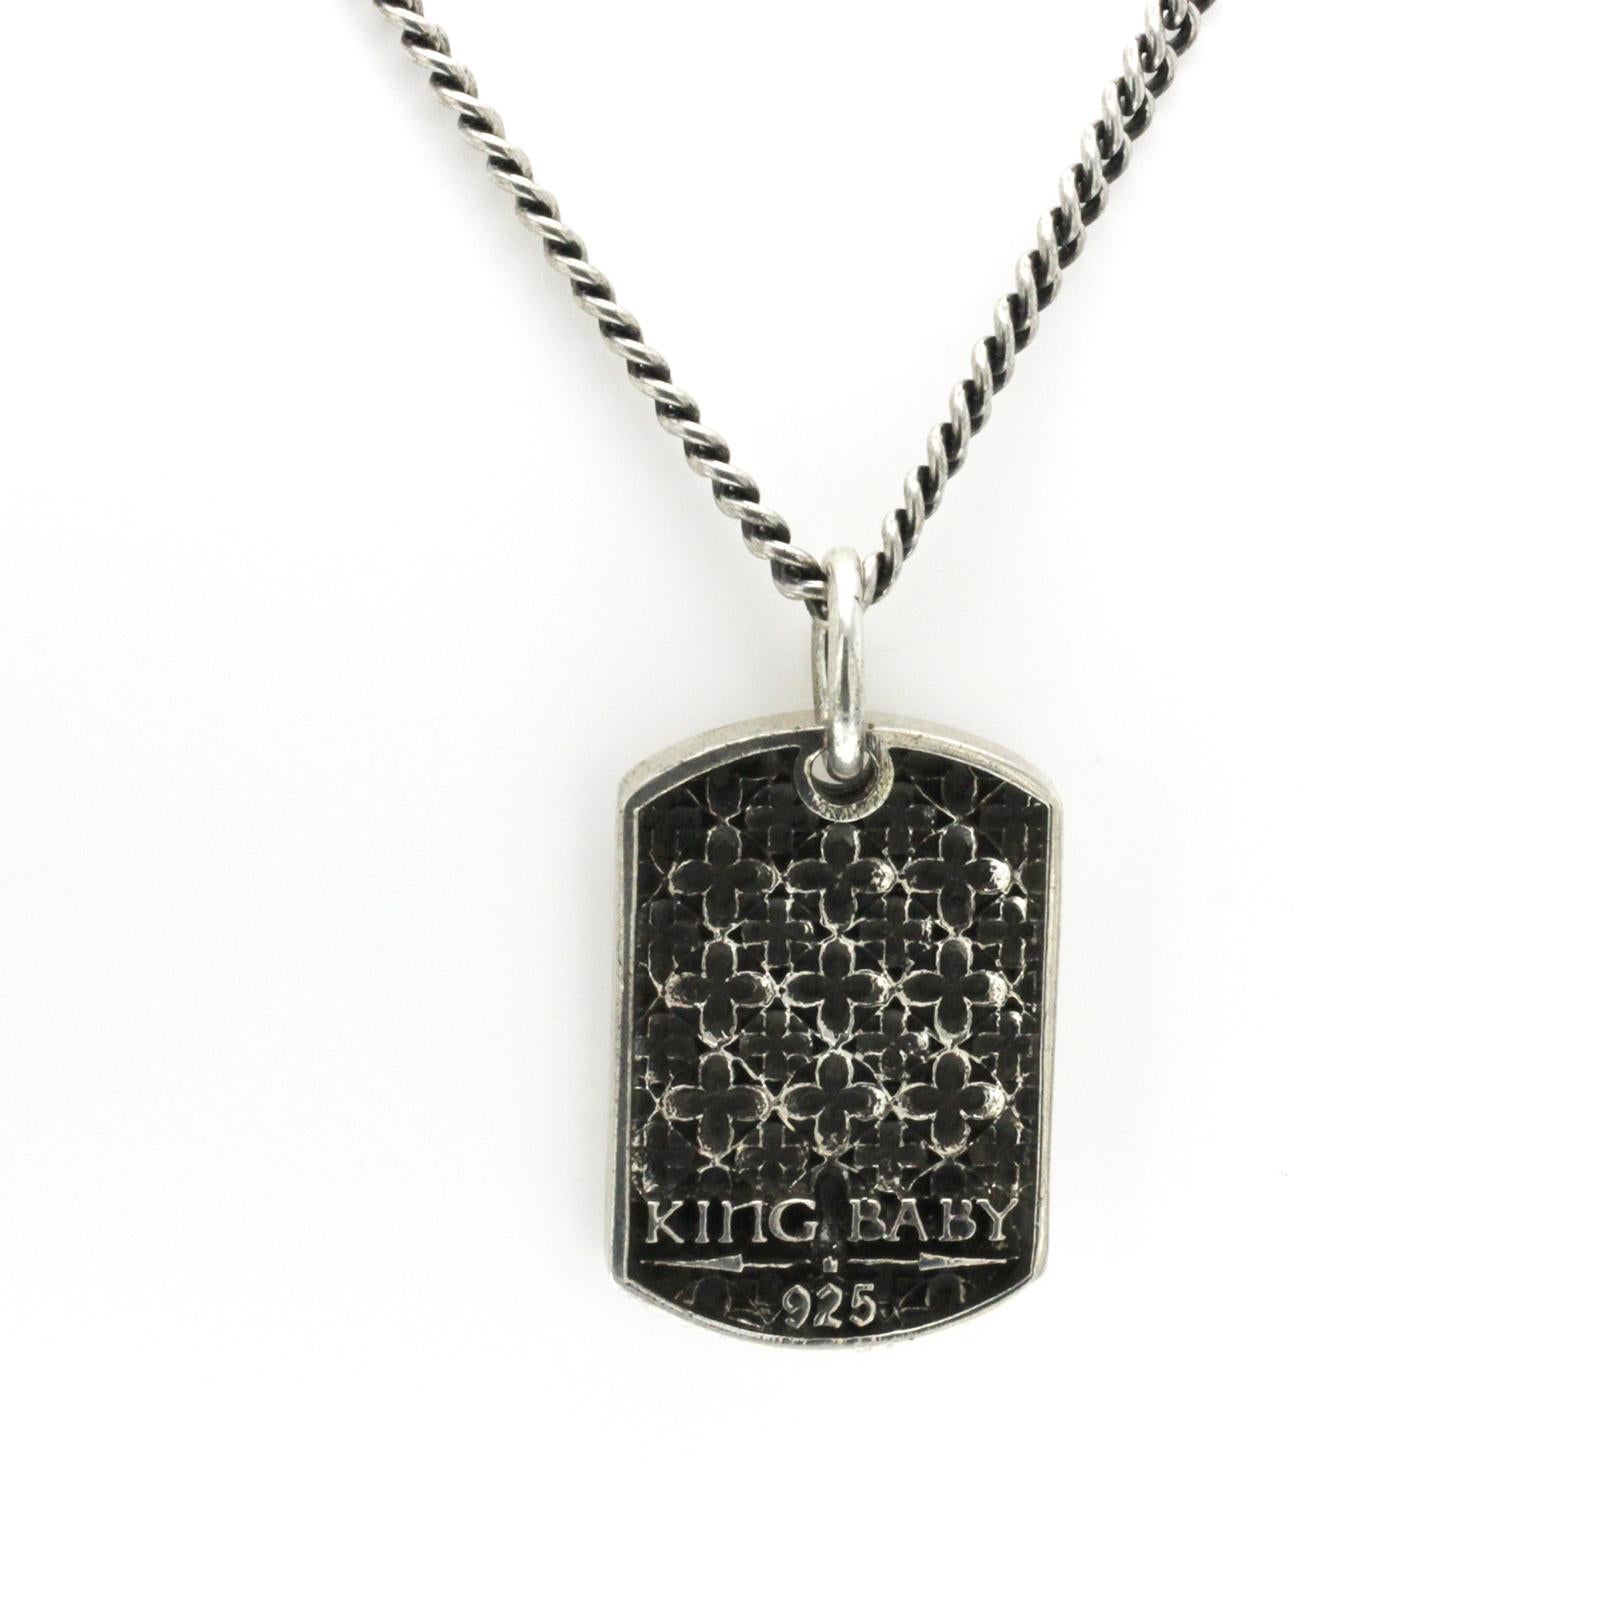 100% Authentic, 100% Customer Satisfaction

Pendant: 34 mm

Chain: 3.5 mm

Size: 24 Inches

Metal: 925 Sterling Silver

Hallmarks: King Baby 925

Total Weight: 37.2 Grams

Stone Type: Diamond

Condition: New

Estimated Price: $1250

Stock Number: U32